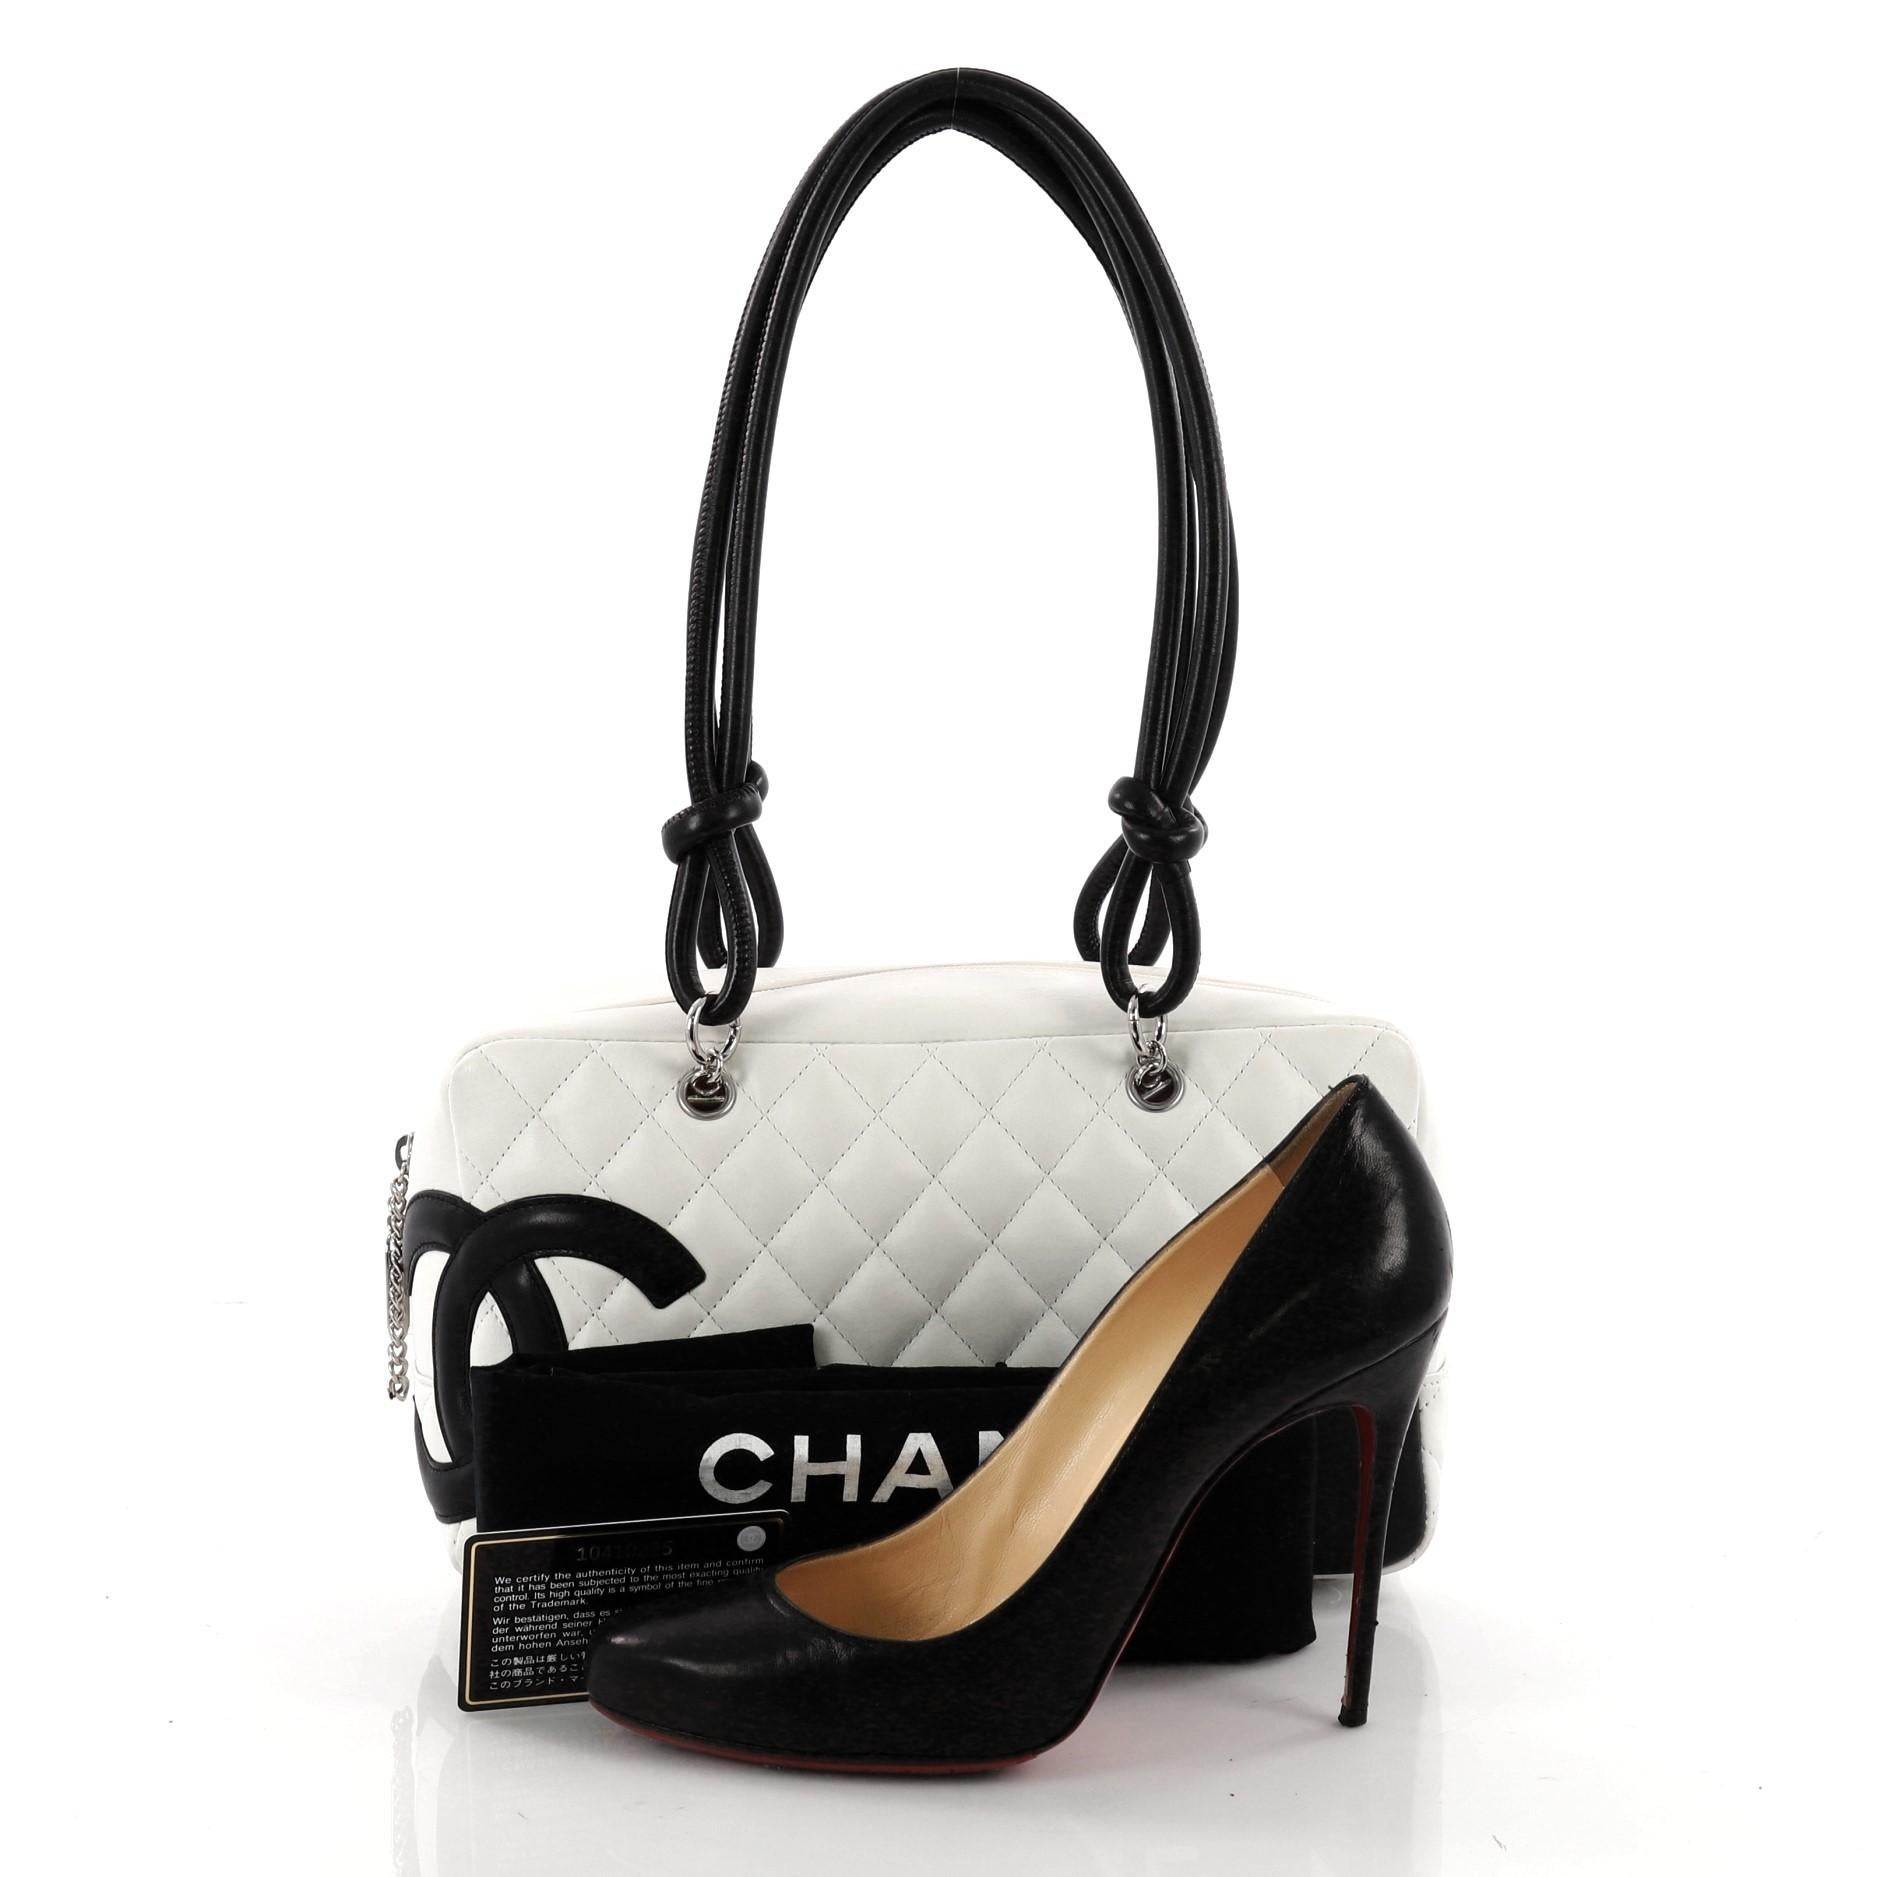 This authentic Chanel Cambon Bowler Bag Quilted Leather Medium is a chic and stylish bag from the brand's Cambon collection. Crafted from white diamond quilted leather, this handbag features a large black interlocking CC side logo, rolled leather